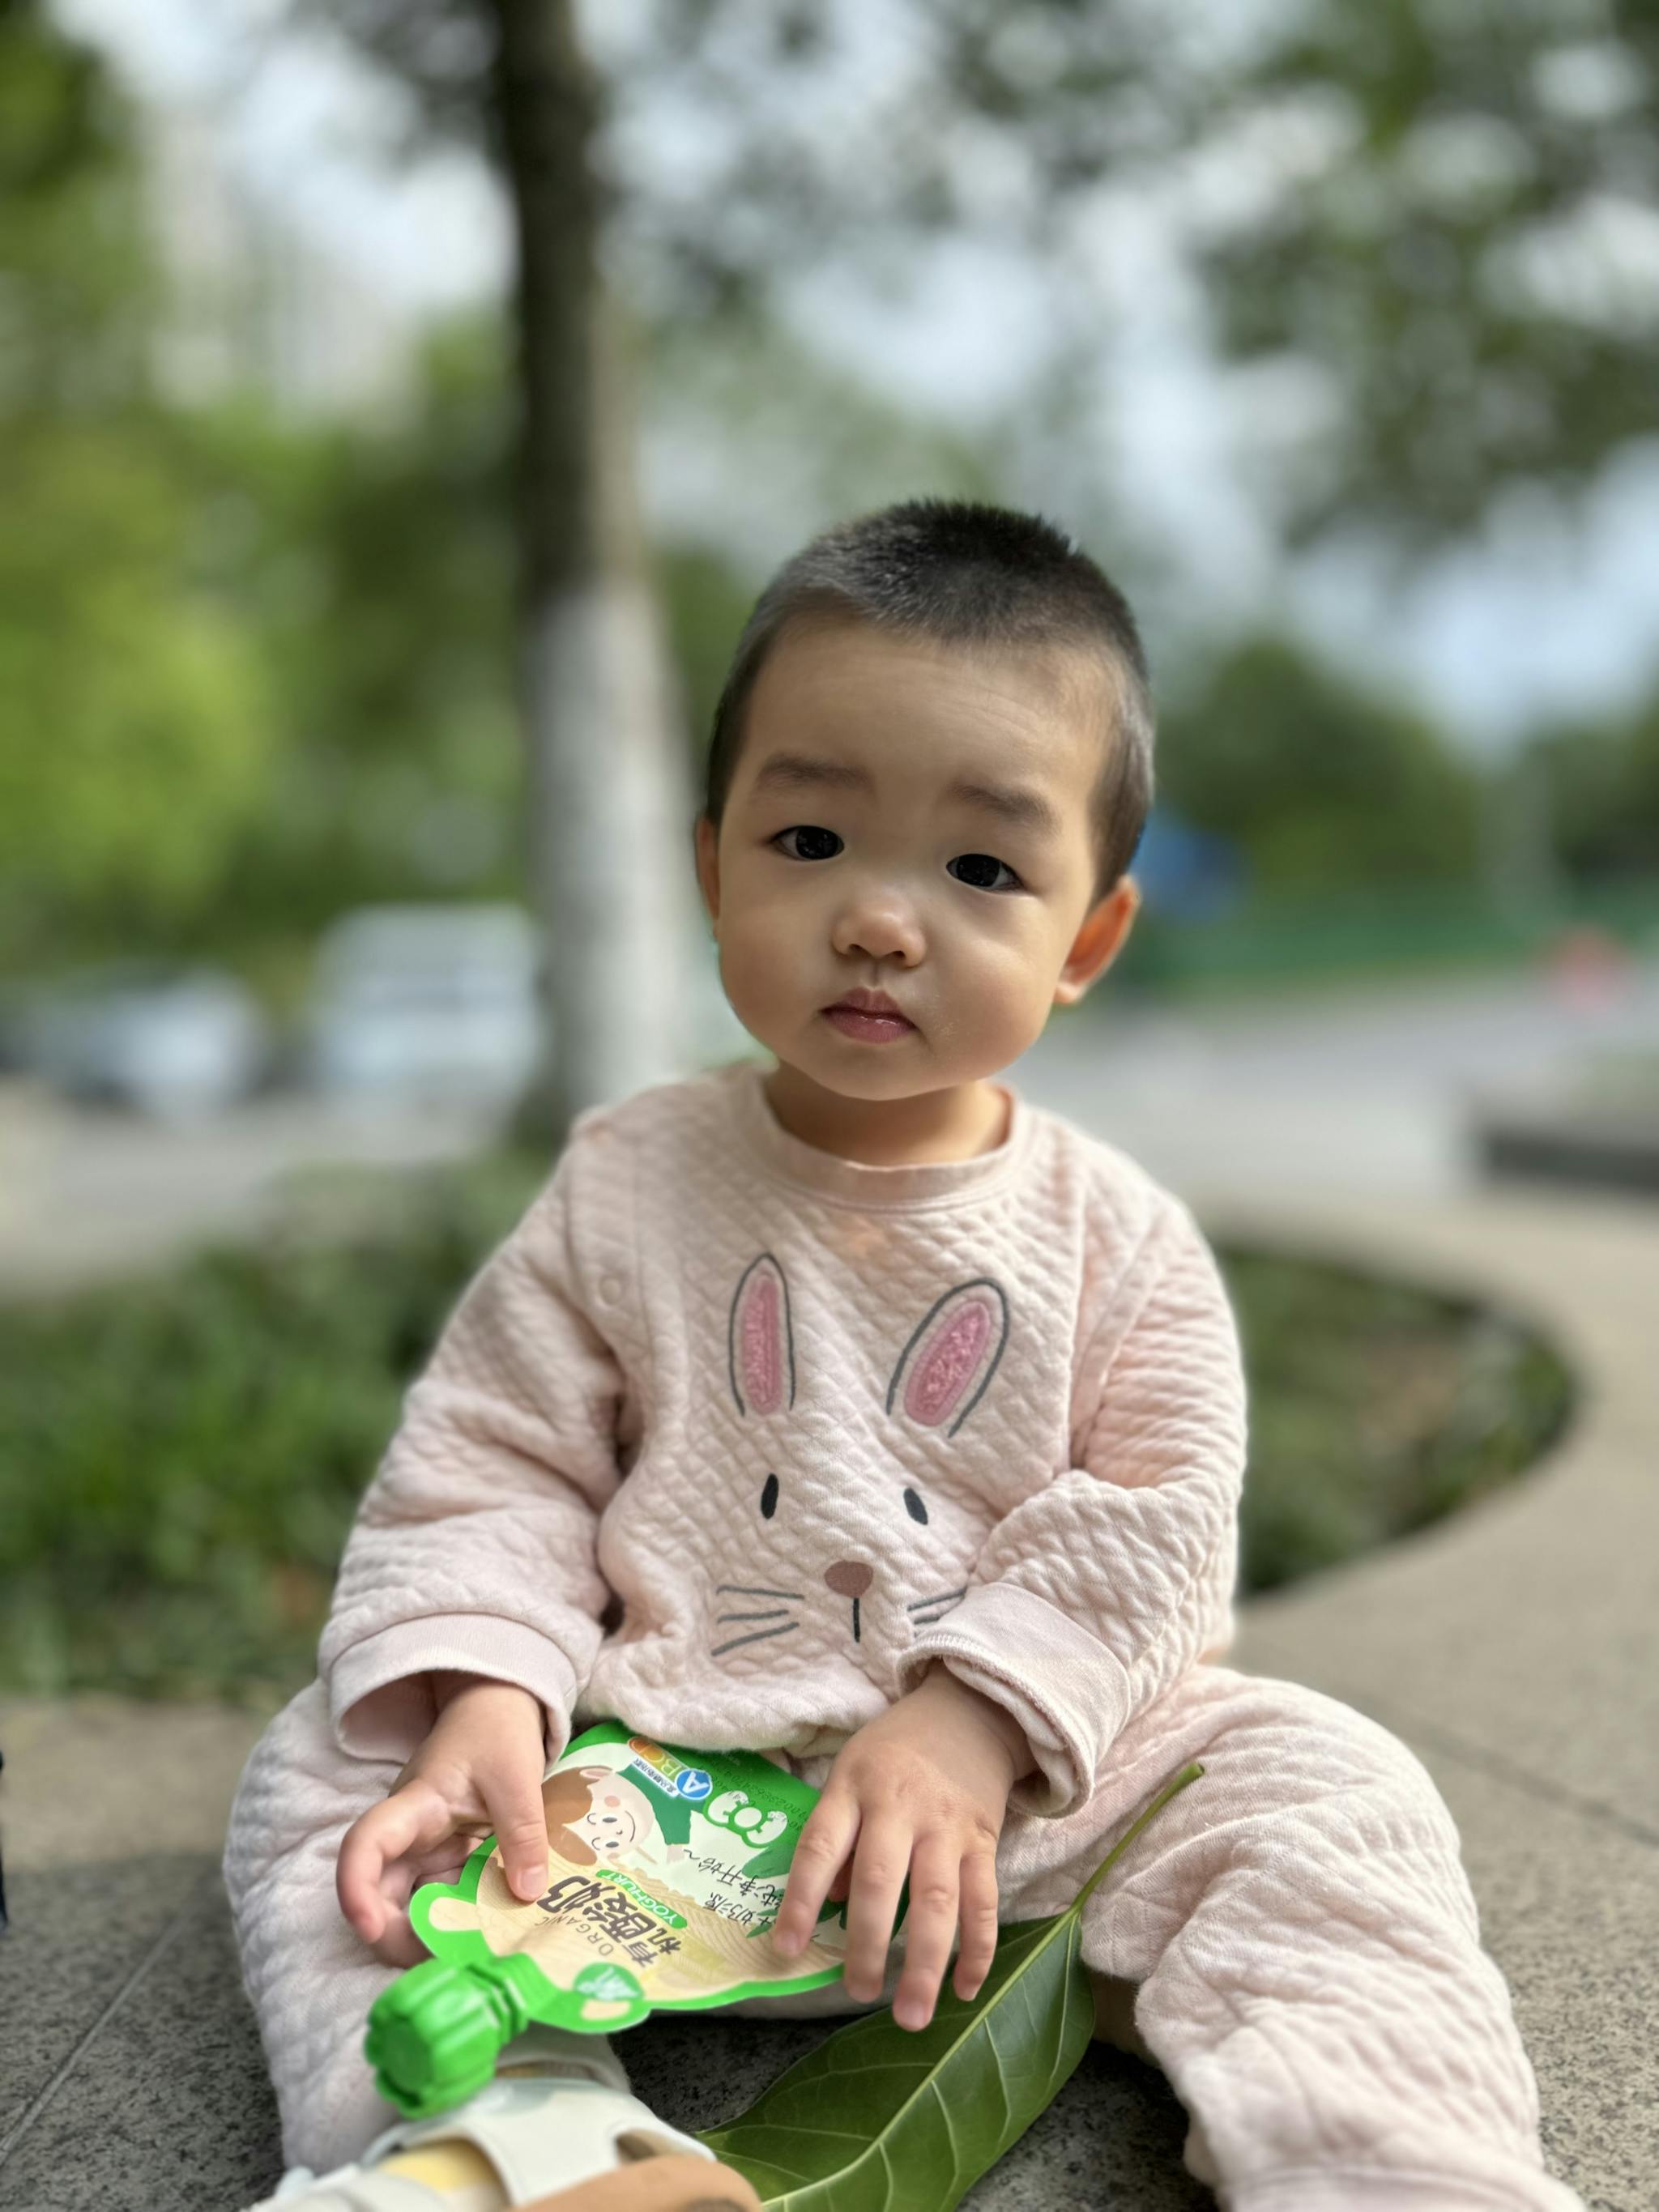 A toddler in a pink outfit with bunny patterns sits on a curb, holding a green leaf, with trees blurred in the background